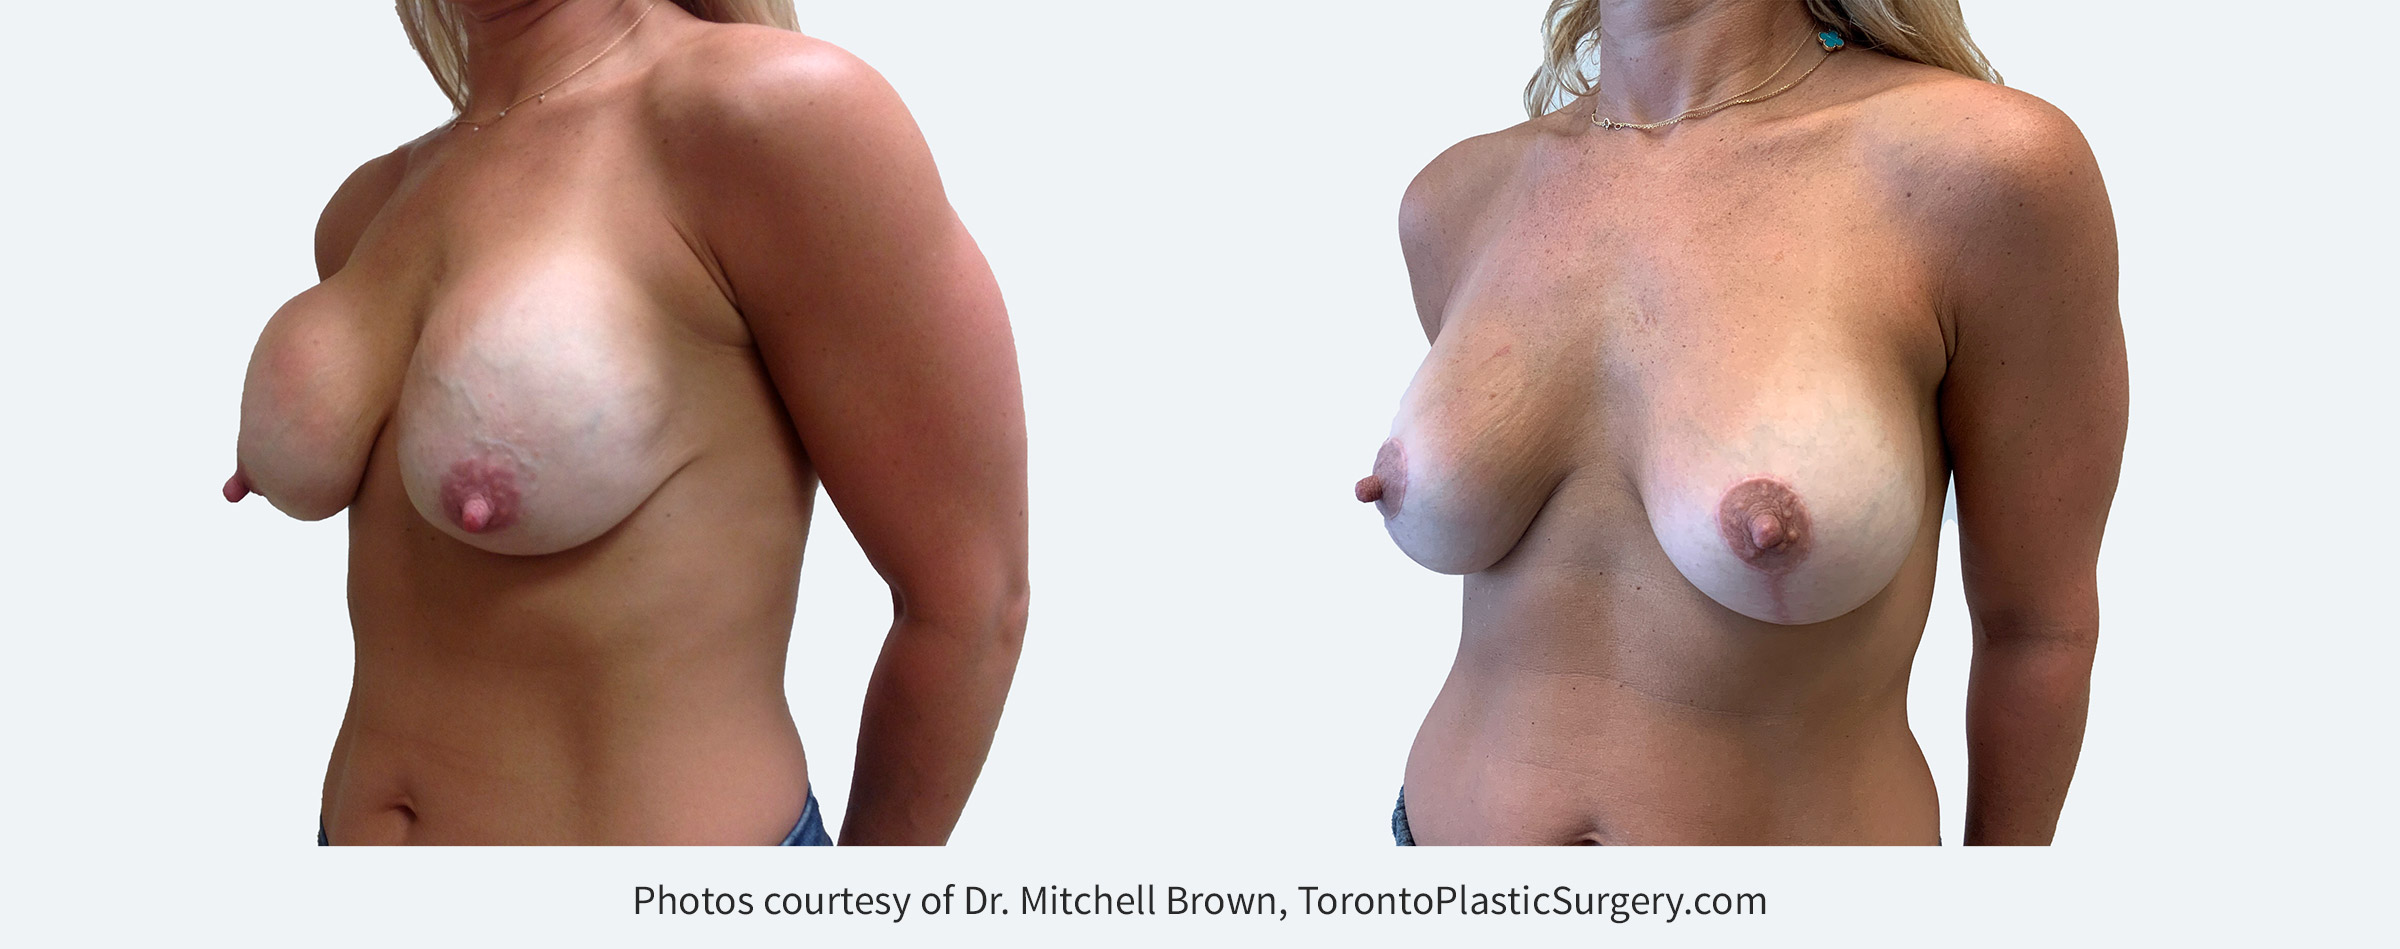 Capsular contracture fifteen years following breast augmentation with anatomic-shaped silicone gel breast implants. Treated with removal of the capsule (scar tissue) and replacement with smooth round silicone gel breast implants. Before and 6 months after.